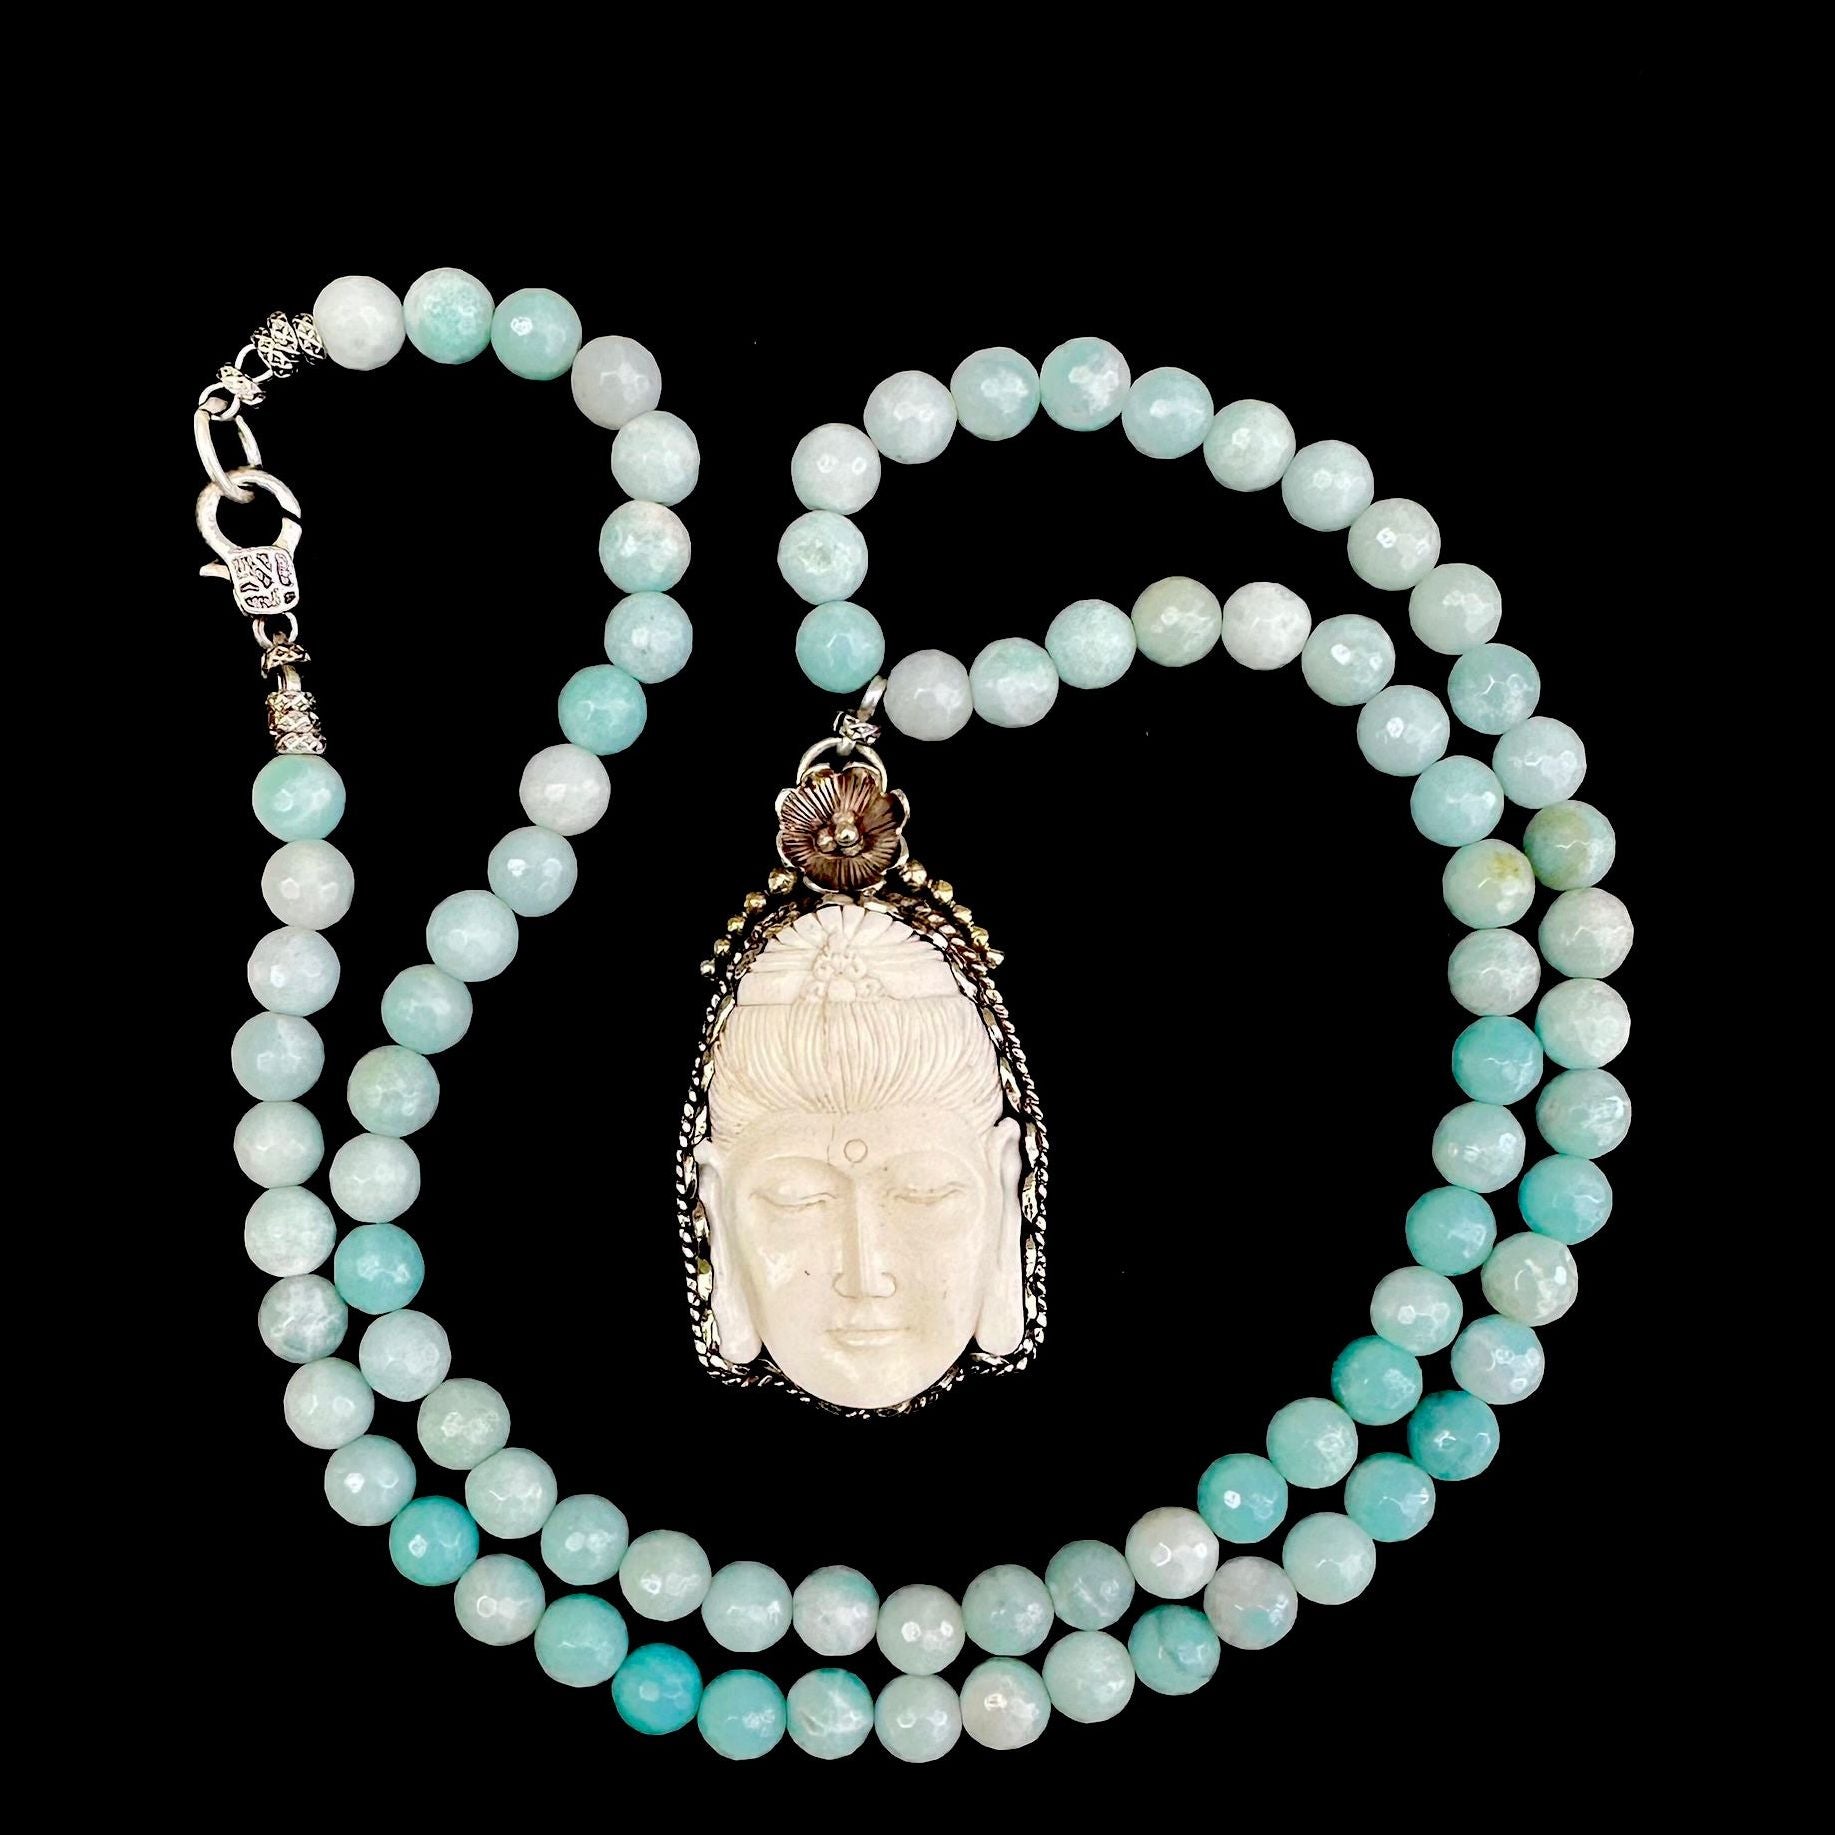 Limited Edition  Carved Repousse Silver Buddha in Faceted Amazonite Necklace